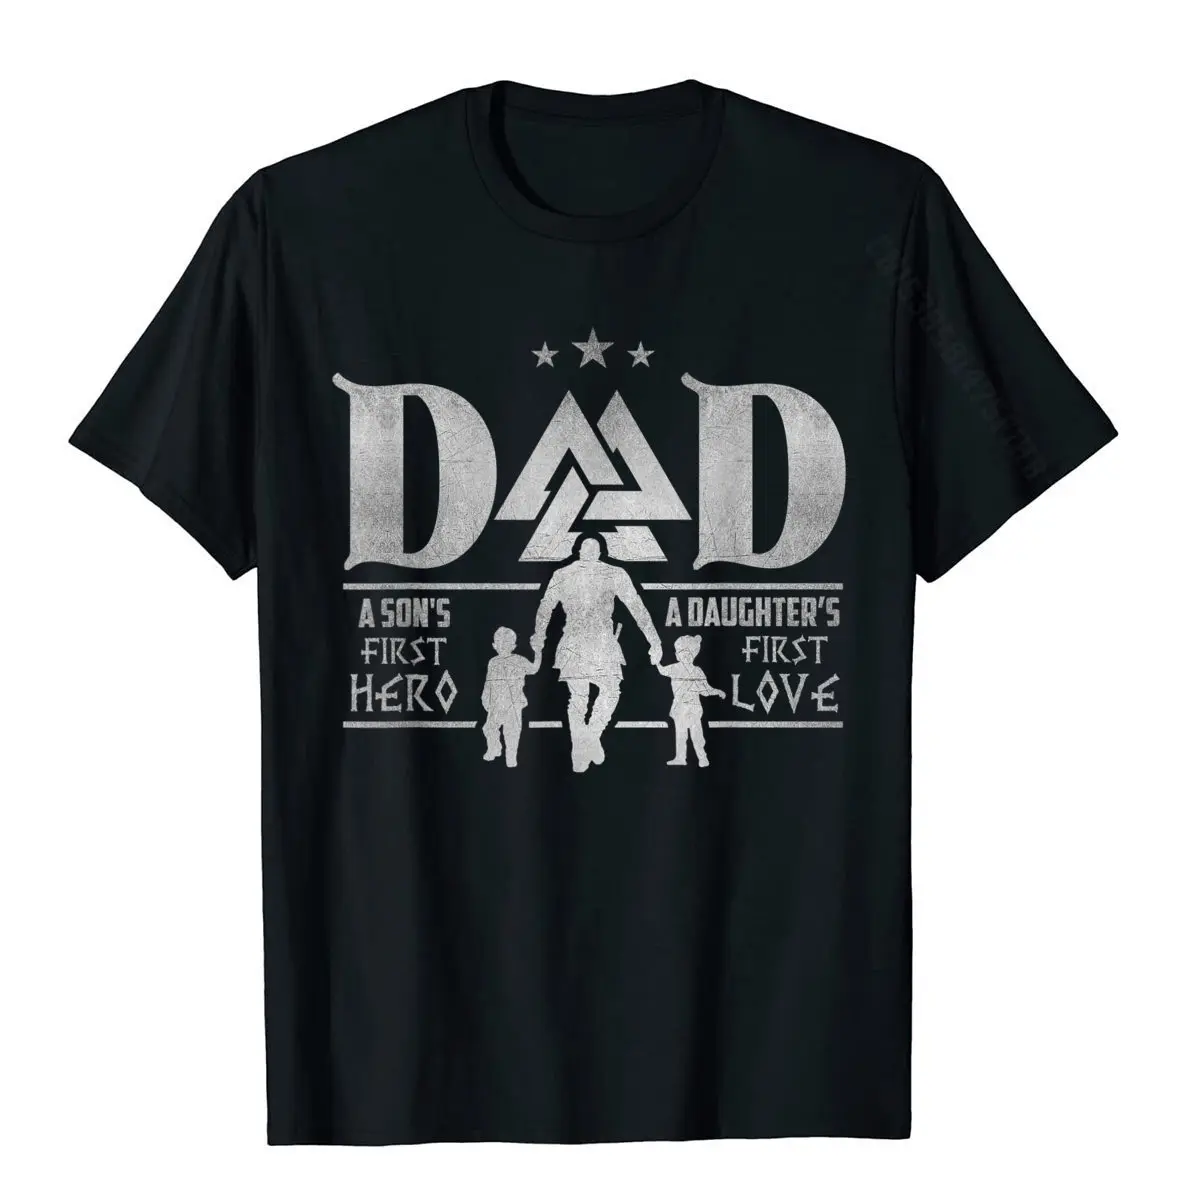 

Viking Shirt: Dad A Son's First Hero A Daughter's First Love Slim Fit Tees For Men Hot Sale Cotton Top T-Shirts Design